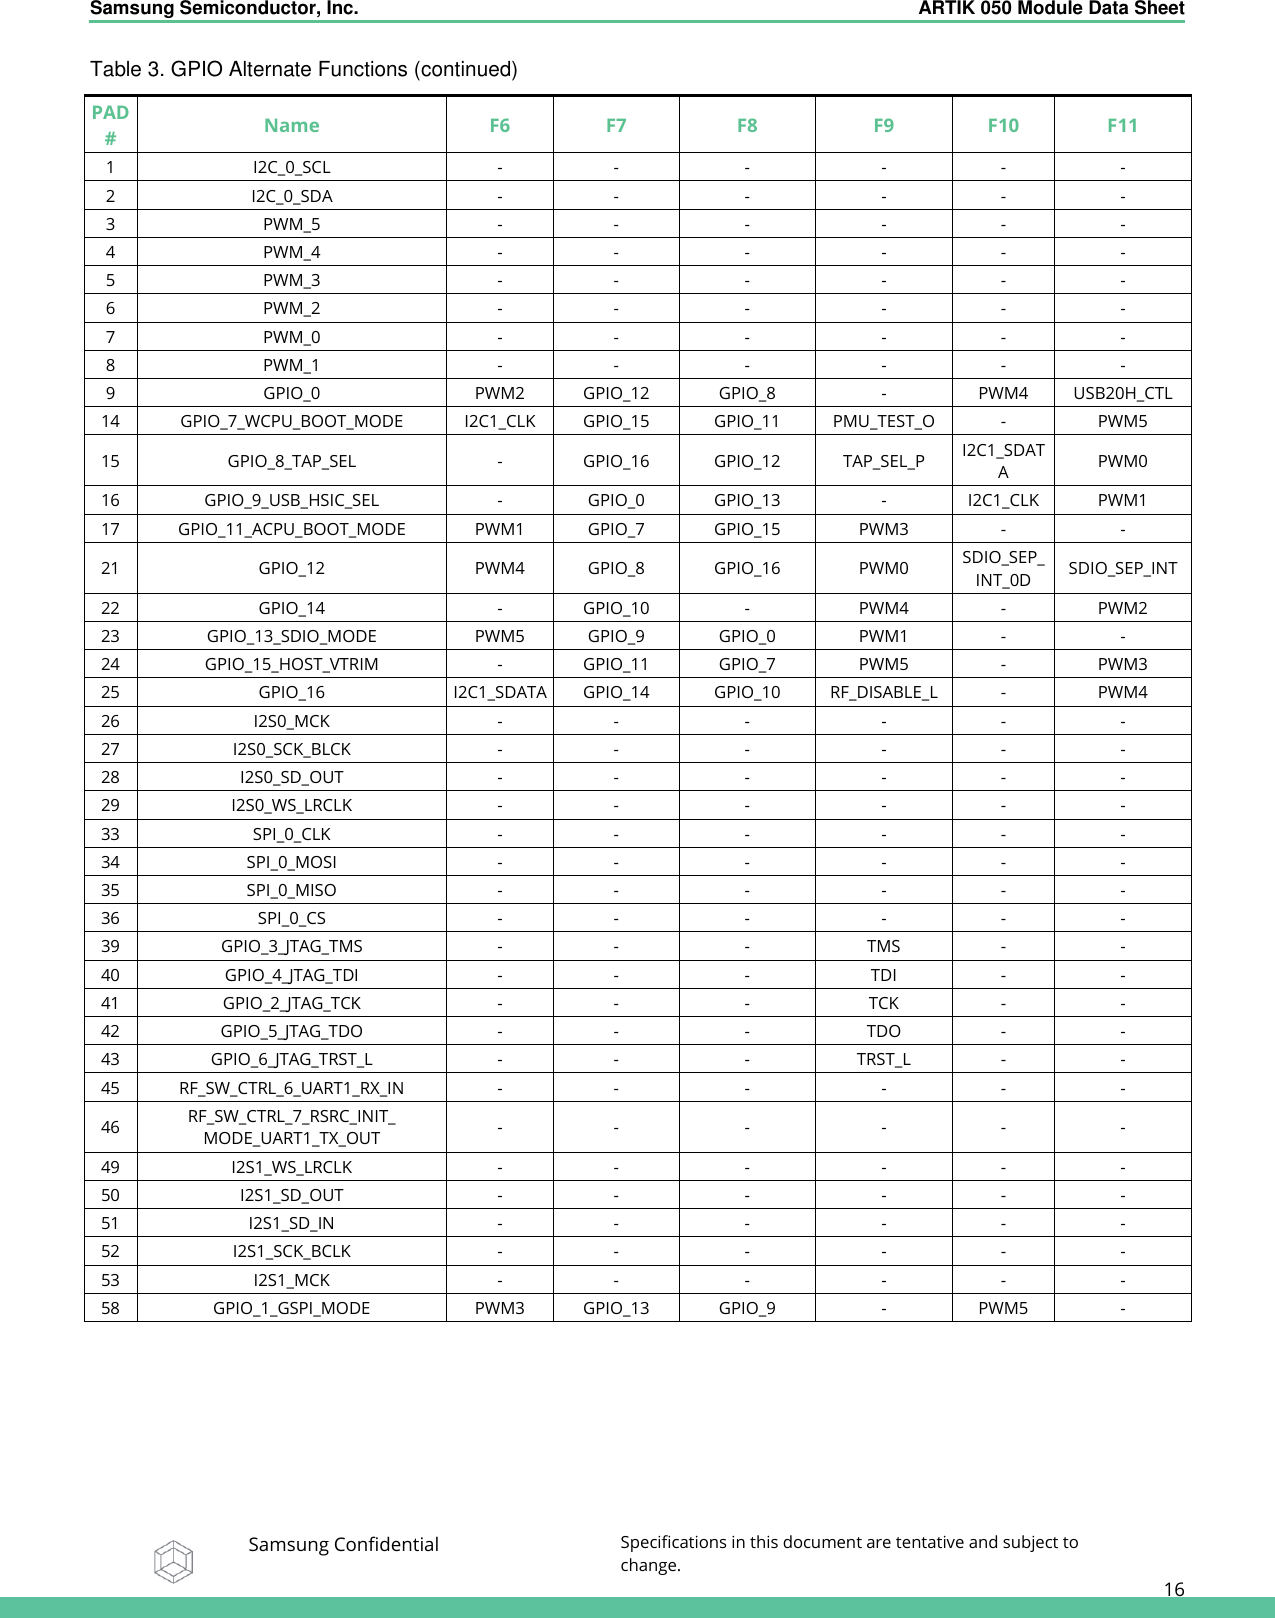 Samsung Semiconductor, Inc.  ARTIK 050 Module Data Sheet   Samsung Confidential Specifications in this document are tentative and subject to change.  16 Table 3. GPIO Alternate Functions (continued) PAD# Name F6 F7 F8 F9 F10 F11 1 I2C_0_SCL - - - - - - 2 I2C_0_SDA - - - - - - 3 PWM_5 - - - - - - 4 PWM_4 - - - - - - 5 PWM_3 - - - - - - 6 PWM_2 - - - - - - 7 PWM_0 - - - - - - 8 PWM_1 - - - - - - 9 GPIO_0 PWM2 GPIO_12 GPIO_8 - PWM4 USB20H_CTL 14 GPIO_7_WCPU_BOOT_MODE I2C1_CLK GPIO_15 GPIO_11 PMU_TEST_O - PWM5 15 GPIO_8_TAP_SEL - GPIO_16 GPIO_12 TAP_SEL_P I2C1_SDATA PWM0 16 GPIO_9_USB_HSIC_SEL - GPIO_0 GPIO_13 - I2C1_CLK PWM1 17 GPIO_11_ACPU_BOOT_MODE PWM1 GPIO_7 GPIO_15 PWM3 - - 21 GPIO_12 PWM4 GPIO_8 GPIO_16 PWM0 SDIO_SEP_ INT_0D SDIO_SEP_INT 22 GPIO_14 - GPIO_10 - PWM4 - PWM2 23 GPIO_13_SDIO_MODE PWM5 GPIO_9 GPIO_0 PWM1 - - 24 GPIO_15_HOST_VTRIM - GPIO_11 GPIO_7 PWM5 - PWM3 25 GPIO_16 I2C1_SDATA GPIO_14 GPIO_10 RF_DISABLE_L - PWM4 26 I2S0_MCK - - - - - - 27 I2S0_SCK_BLCK - - - - - - 28 I2S0_SD_OUT - - - - - - 29 I2S0_WS_LRCLK - - - - - - 33 SPI_0_CLK - - - - - - 34 SPI_0_MOSI - - - - - - 35 SPI_0_MISO - - - - - - 36 SPI_0_CS - - - - - - 39 GPIO_3_JTAG_TMS - - - TMS - - 40 GPIO_4_JTAG_TDI - - - TDI - - 41 GPIO_2_JTAG_TCK - - - TCK - - 42 GPIO_5_JTAG_TDO - - - TDO - - 43 GPIO_6_JTAG_TRST_L - - - TRST_L - - 45 RF_SW_CTRL_6_UART1_RX_IN - - - - - - 46 RF_SW_CTRL_7_RSRC_INIT_ MODE_UART1_TX_OUT - - - - - - 49 I2S1_WS_LRCLK - - - - - - 50 I2S1_SD_OUT - - - - - - 51 I2S1_SD_IN - - - - - - 52 I2S1_SCK_BCLK - - - - - - 53 I2S1_MCK - - - - - - 58 GPIO_1_GSPI_MODE PWM3 GPIO_13 GPIO_9 - PWM5 -  